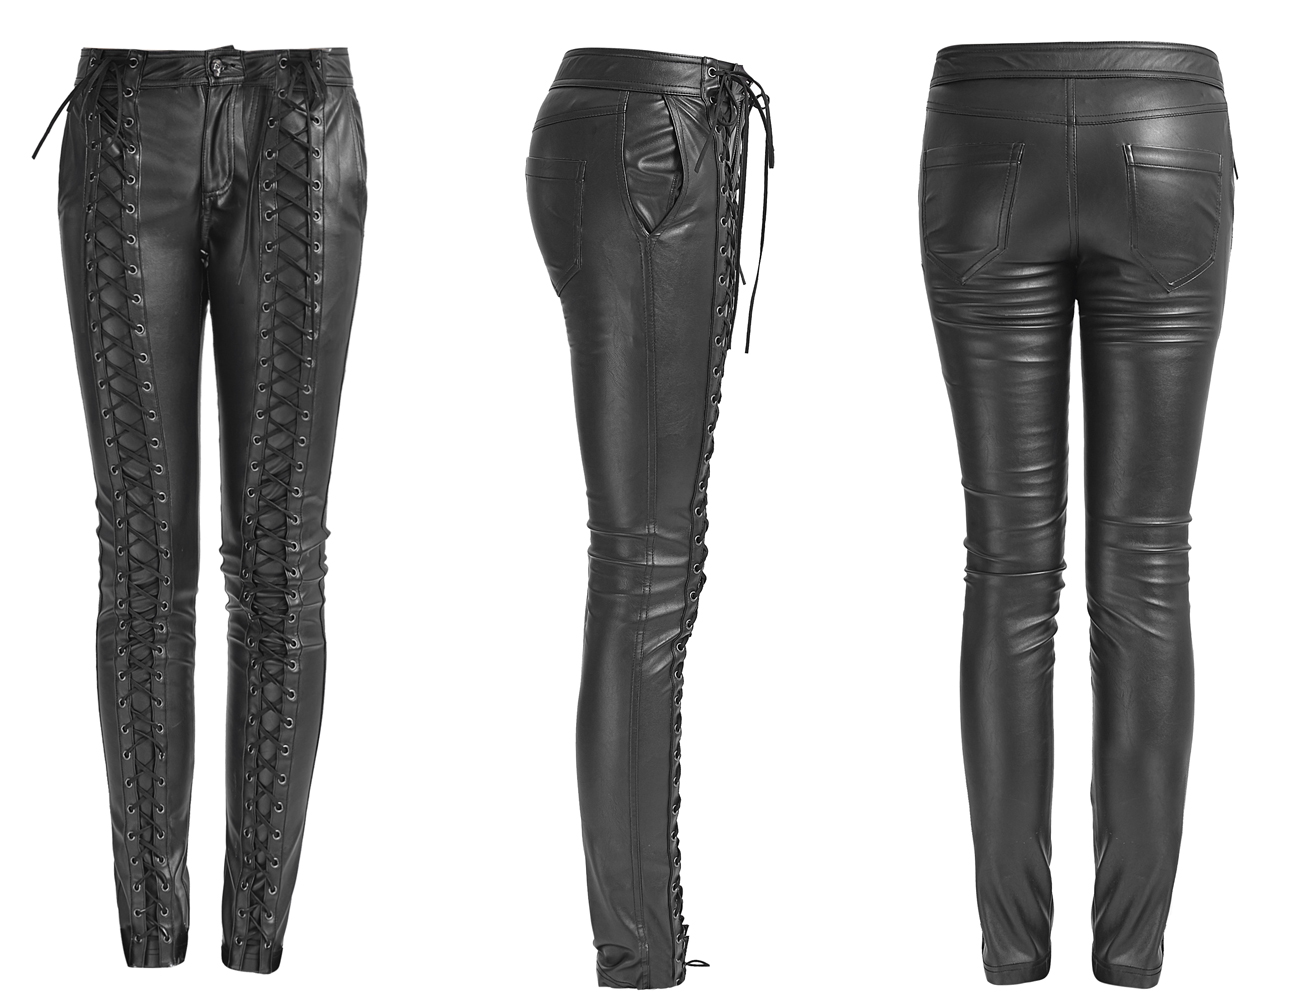 leather front trousers